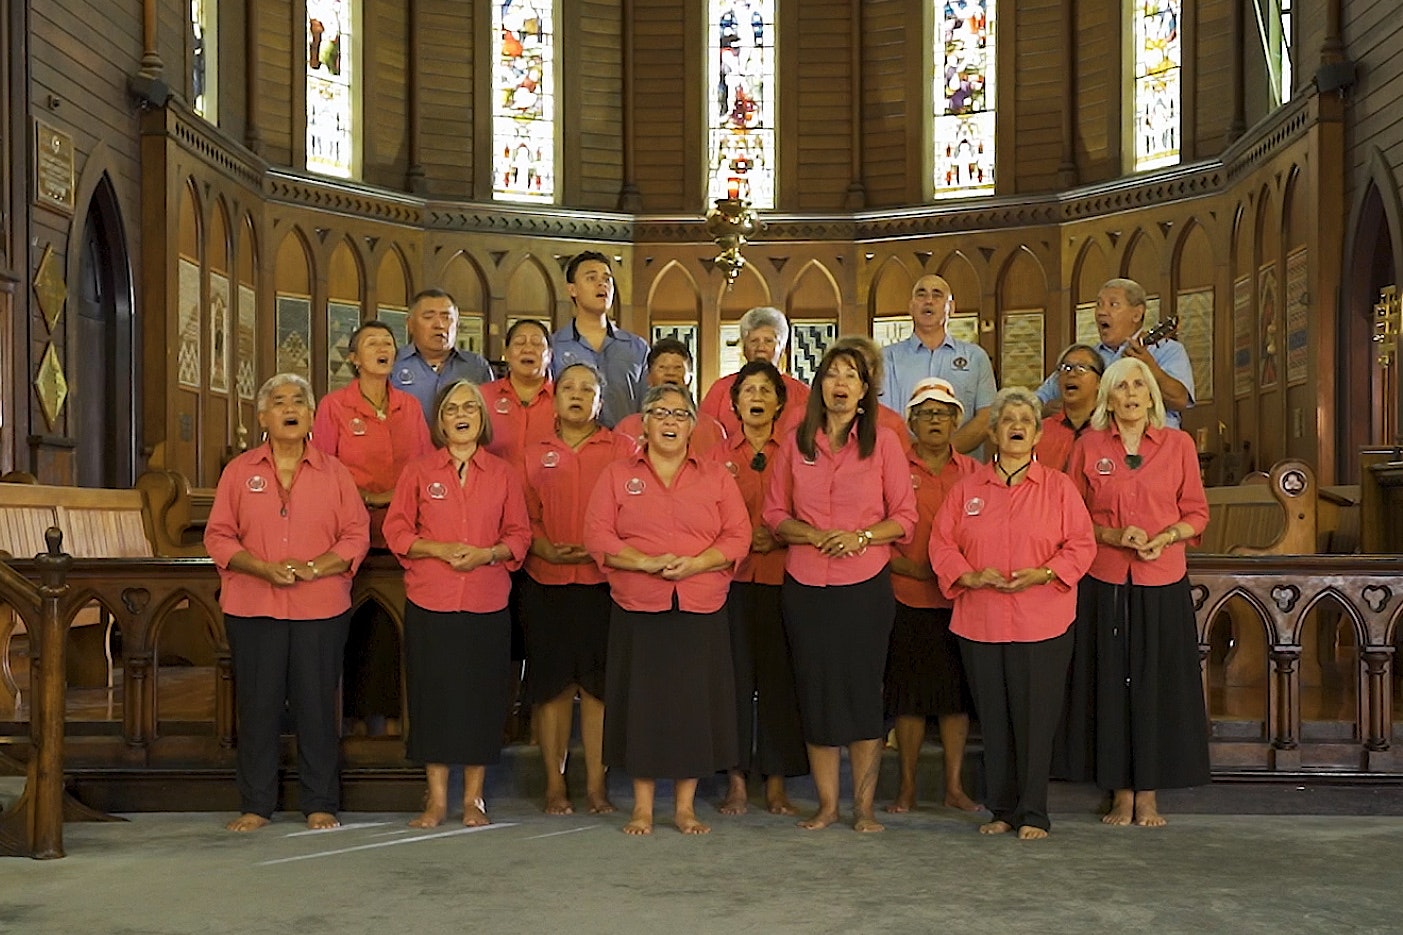 A group of people singing on a church altar